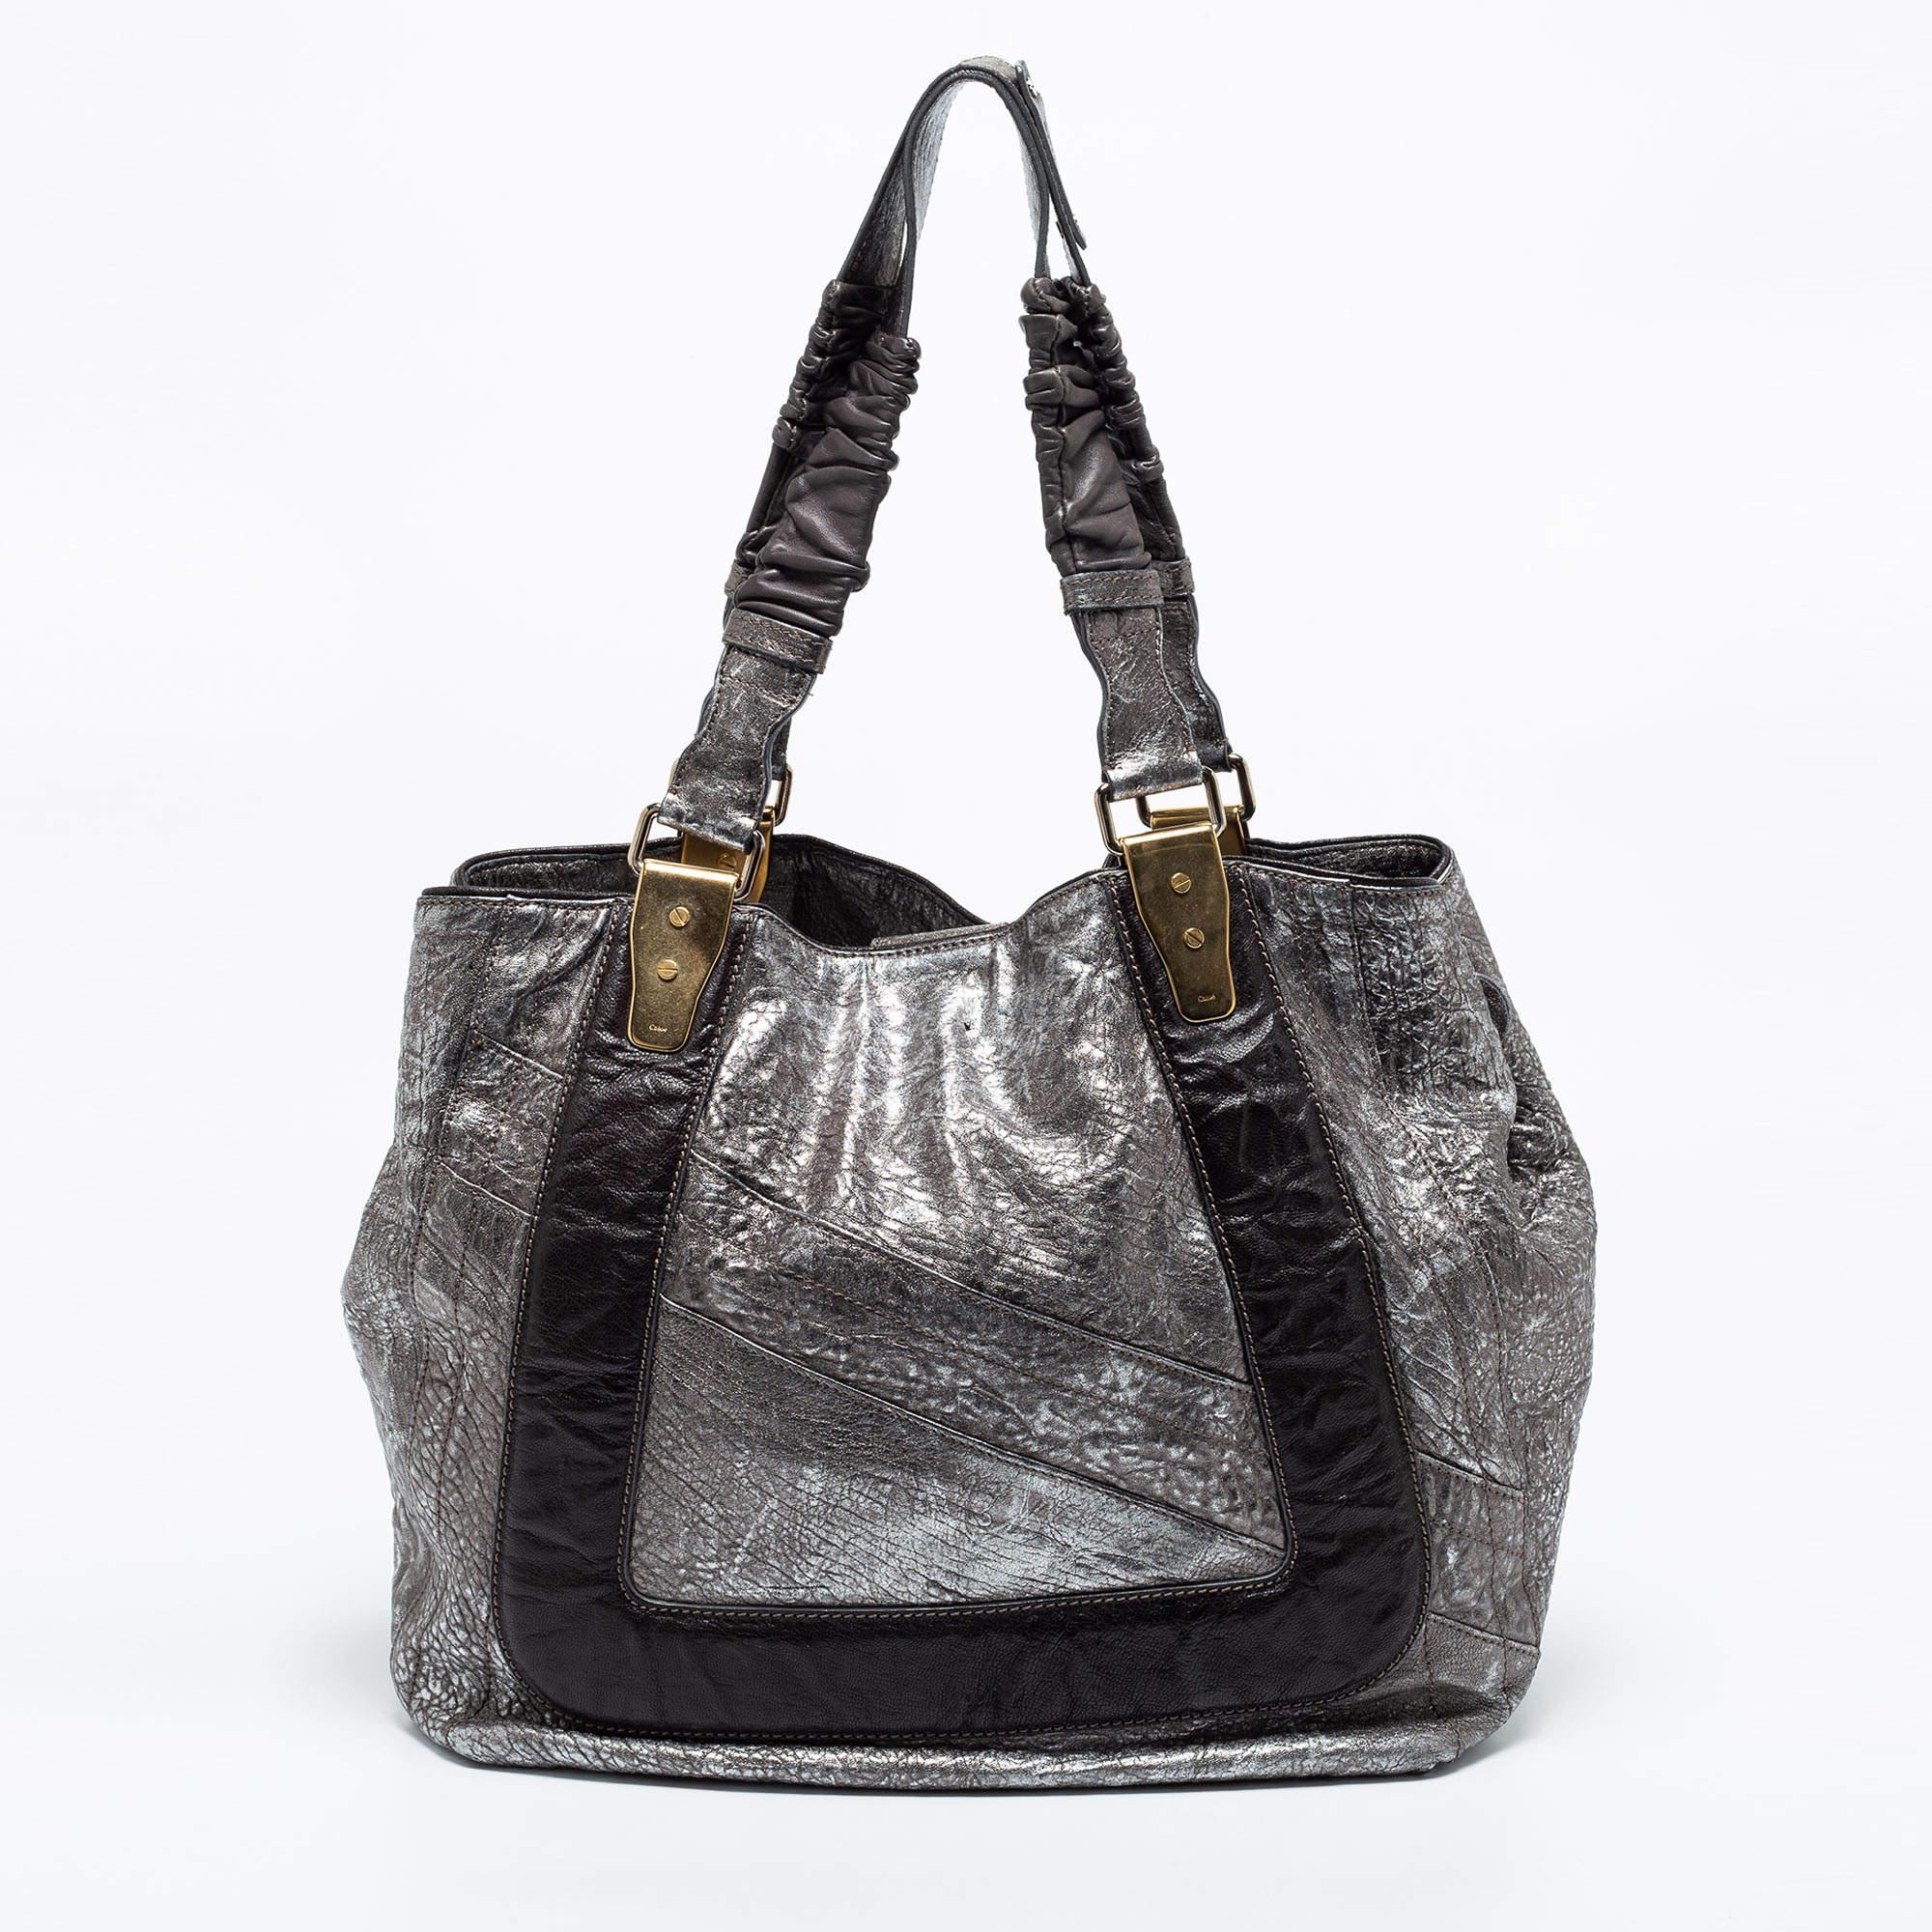 Appreciated for its feminine designs, Chloe celebrates beauty through its unmatched craftsmanship and versatile silhouettes. This shopper tote is made from pebbled leather and is enriched with exquisite details. To offer you practical ease, it is